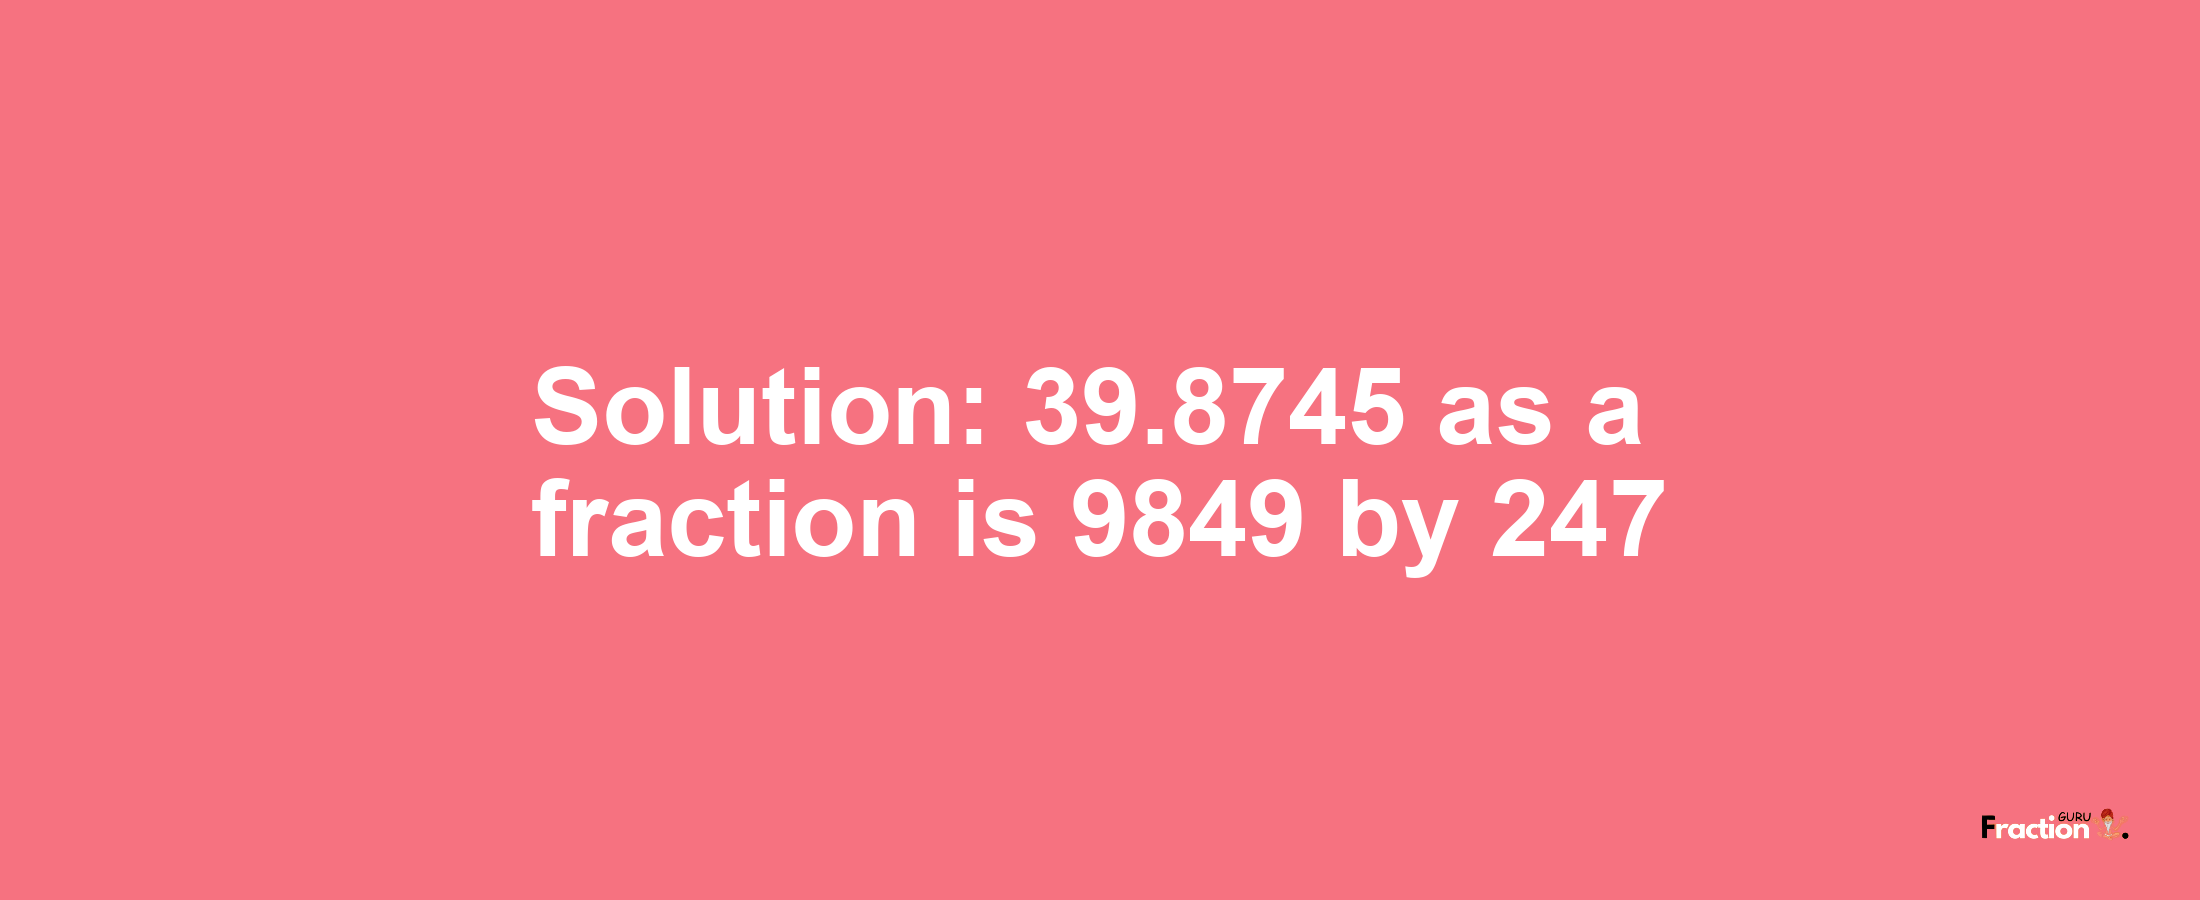 Solution:39.8745 as a fraction is 9849/247